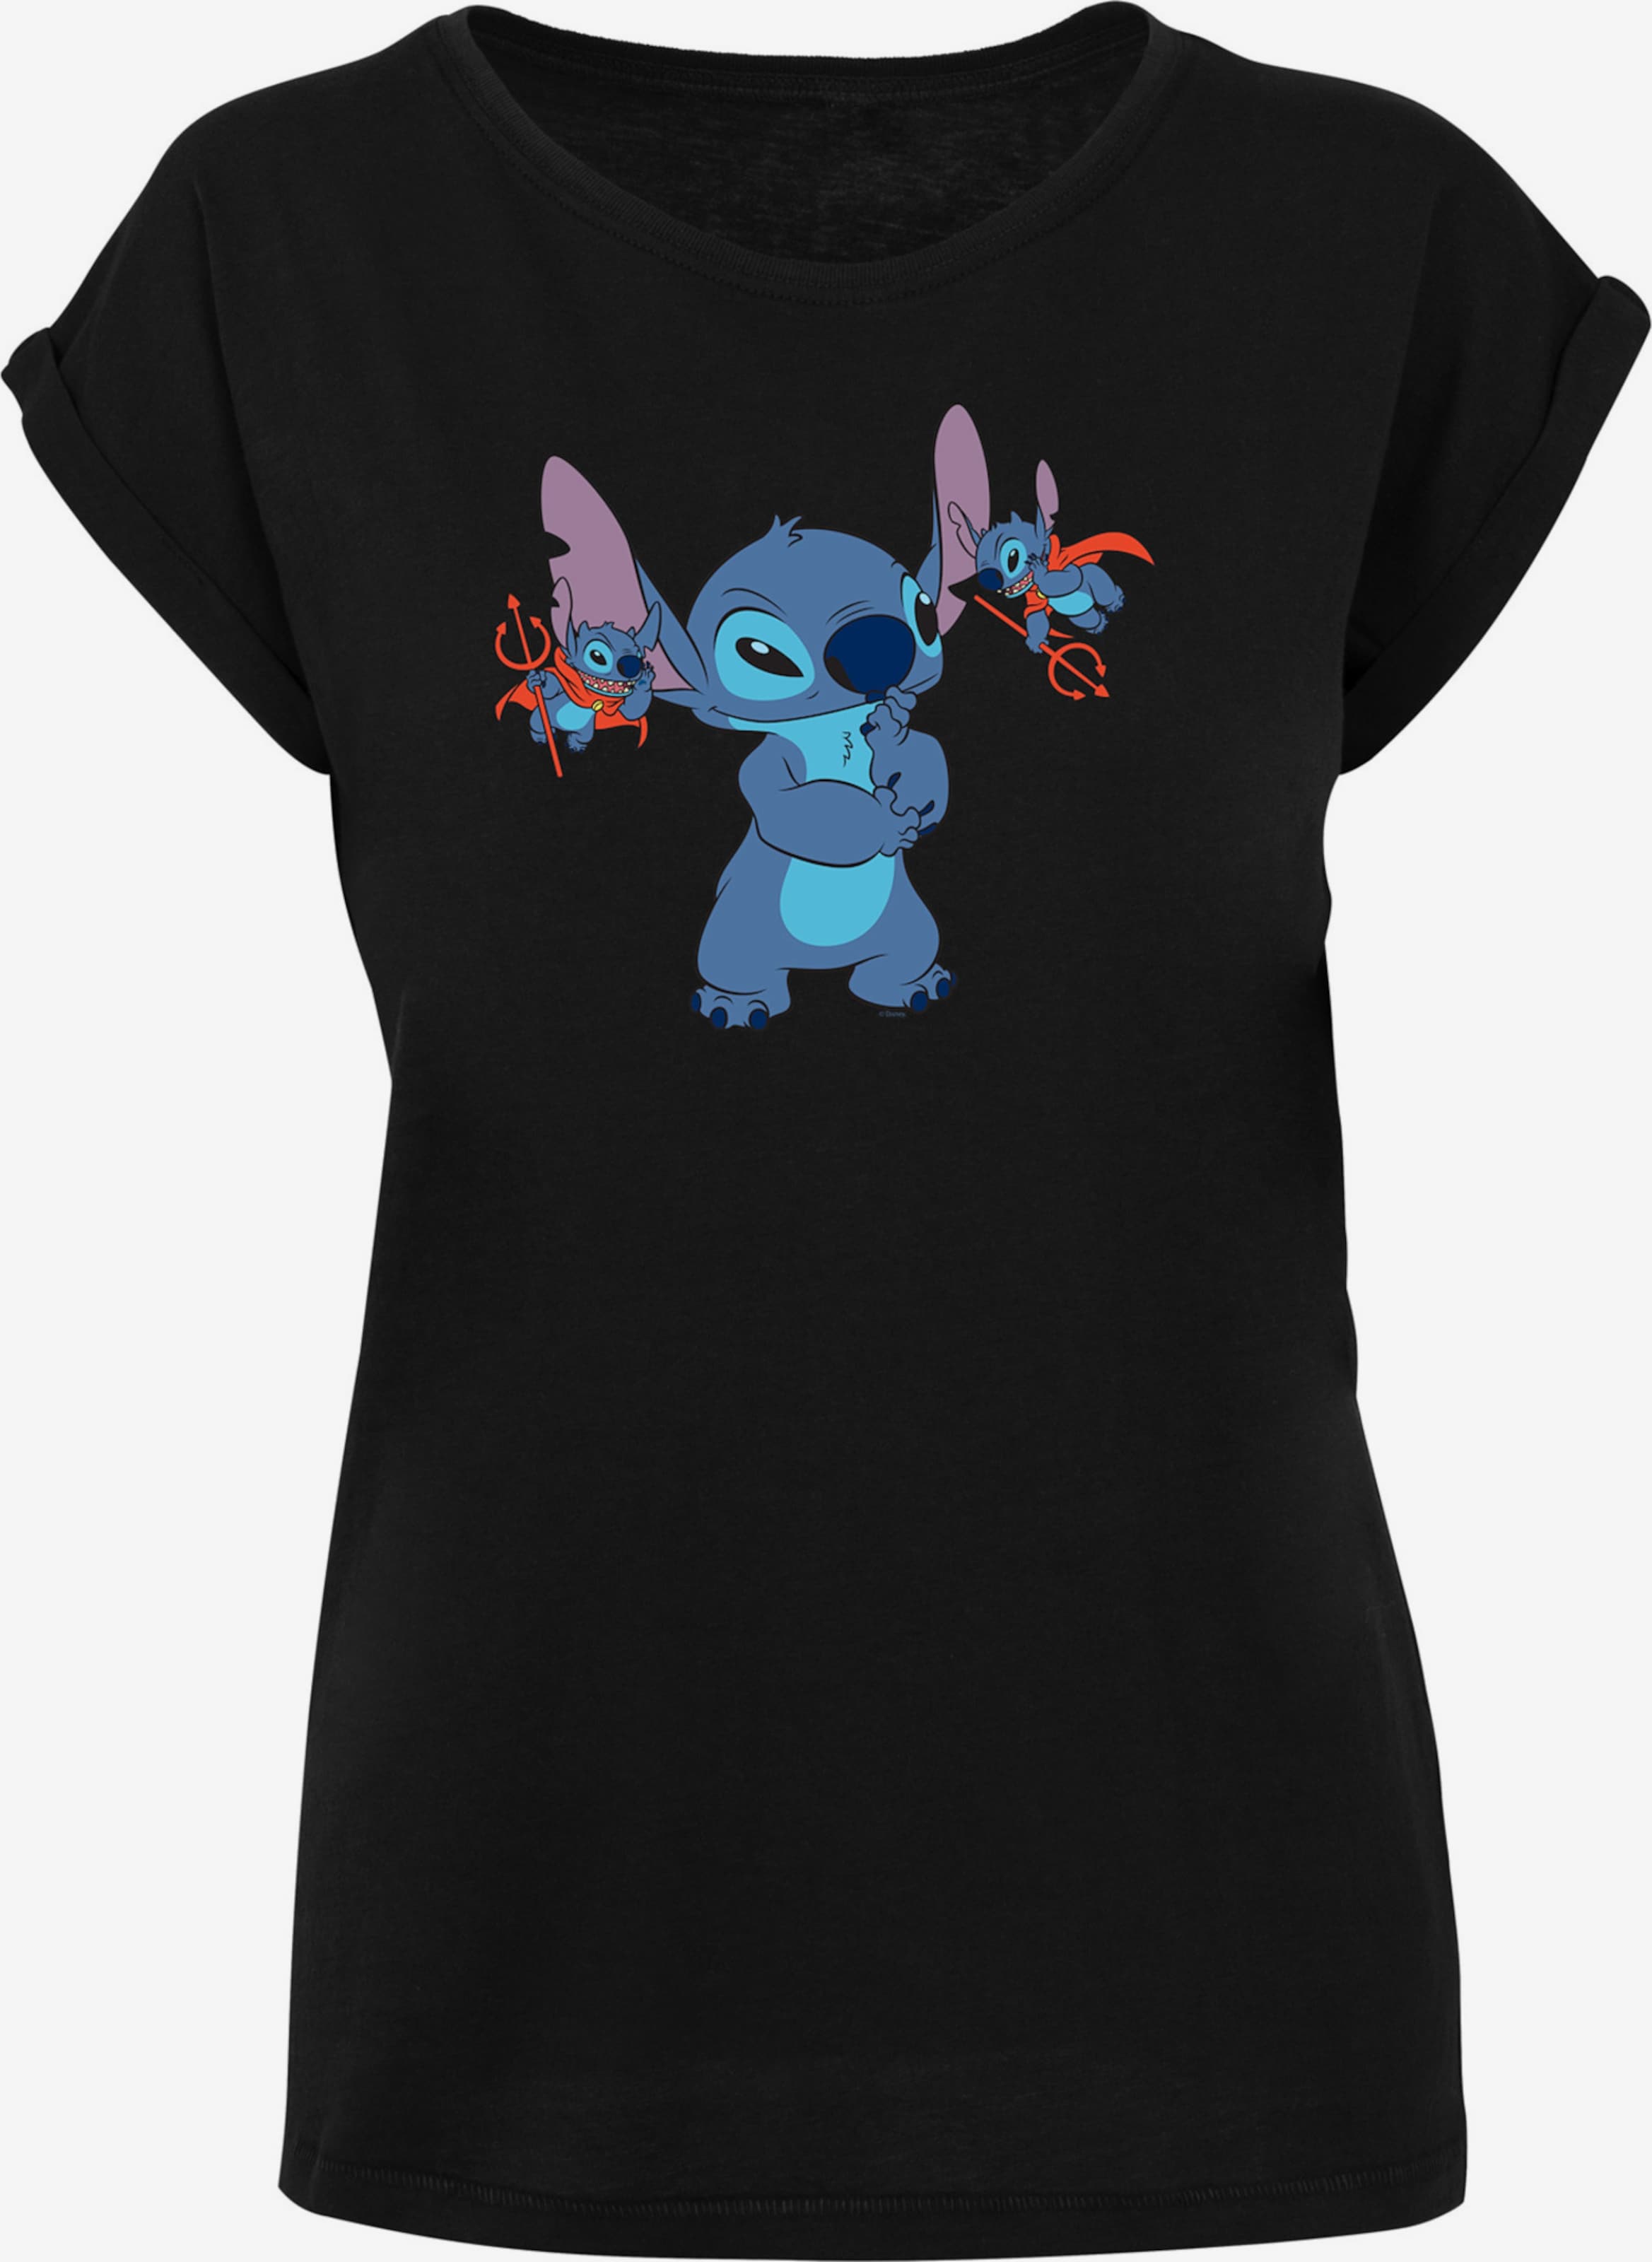 And ABOUT Little | YOU Stitch Devils\' in Black F4NT4STIC \'Disney Shirt Lilo